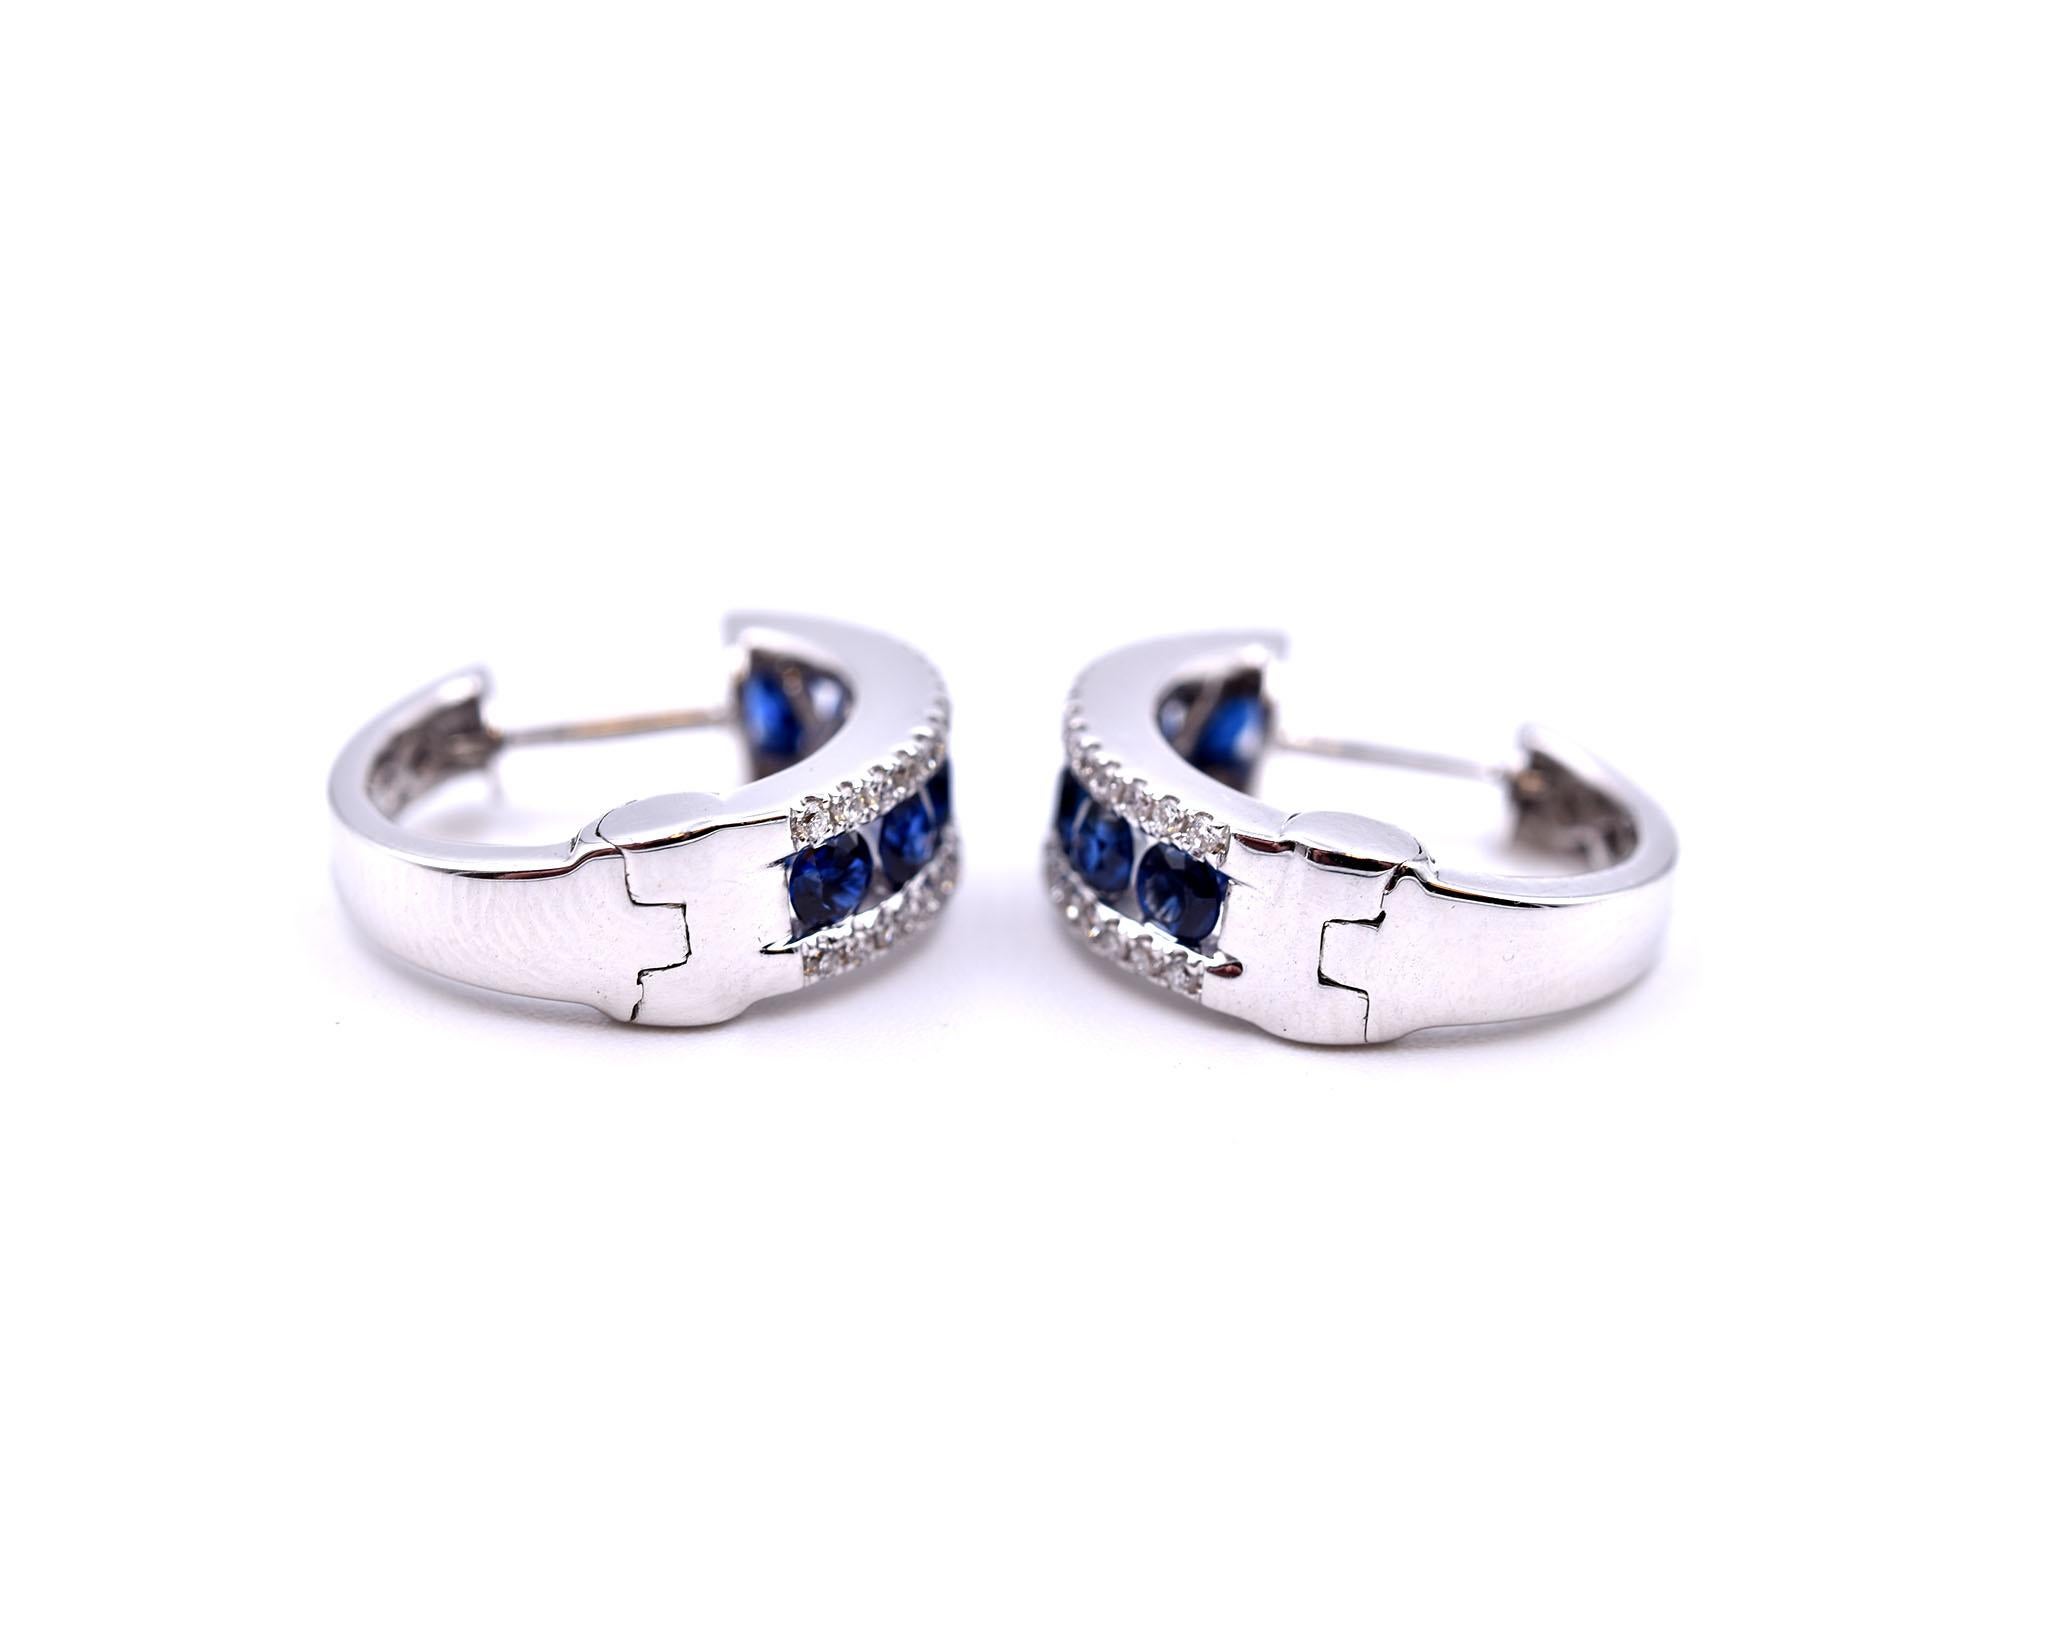 Designer: custom design
Material: 14k white gold
Gemstones: 12 round sapphires = 0.85cttw
Diamonds: 68 round brilliant cuts = 0.34cttw
Color: G
Clarity: VS
Dimensions: earrings measure approximately 15.70mm by 5.15mm
Fastenings: huggie style
Weight: